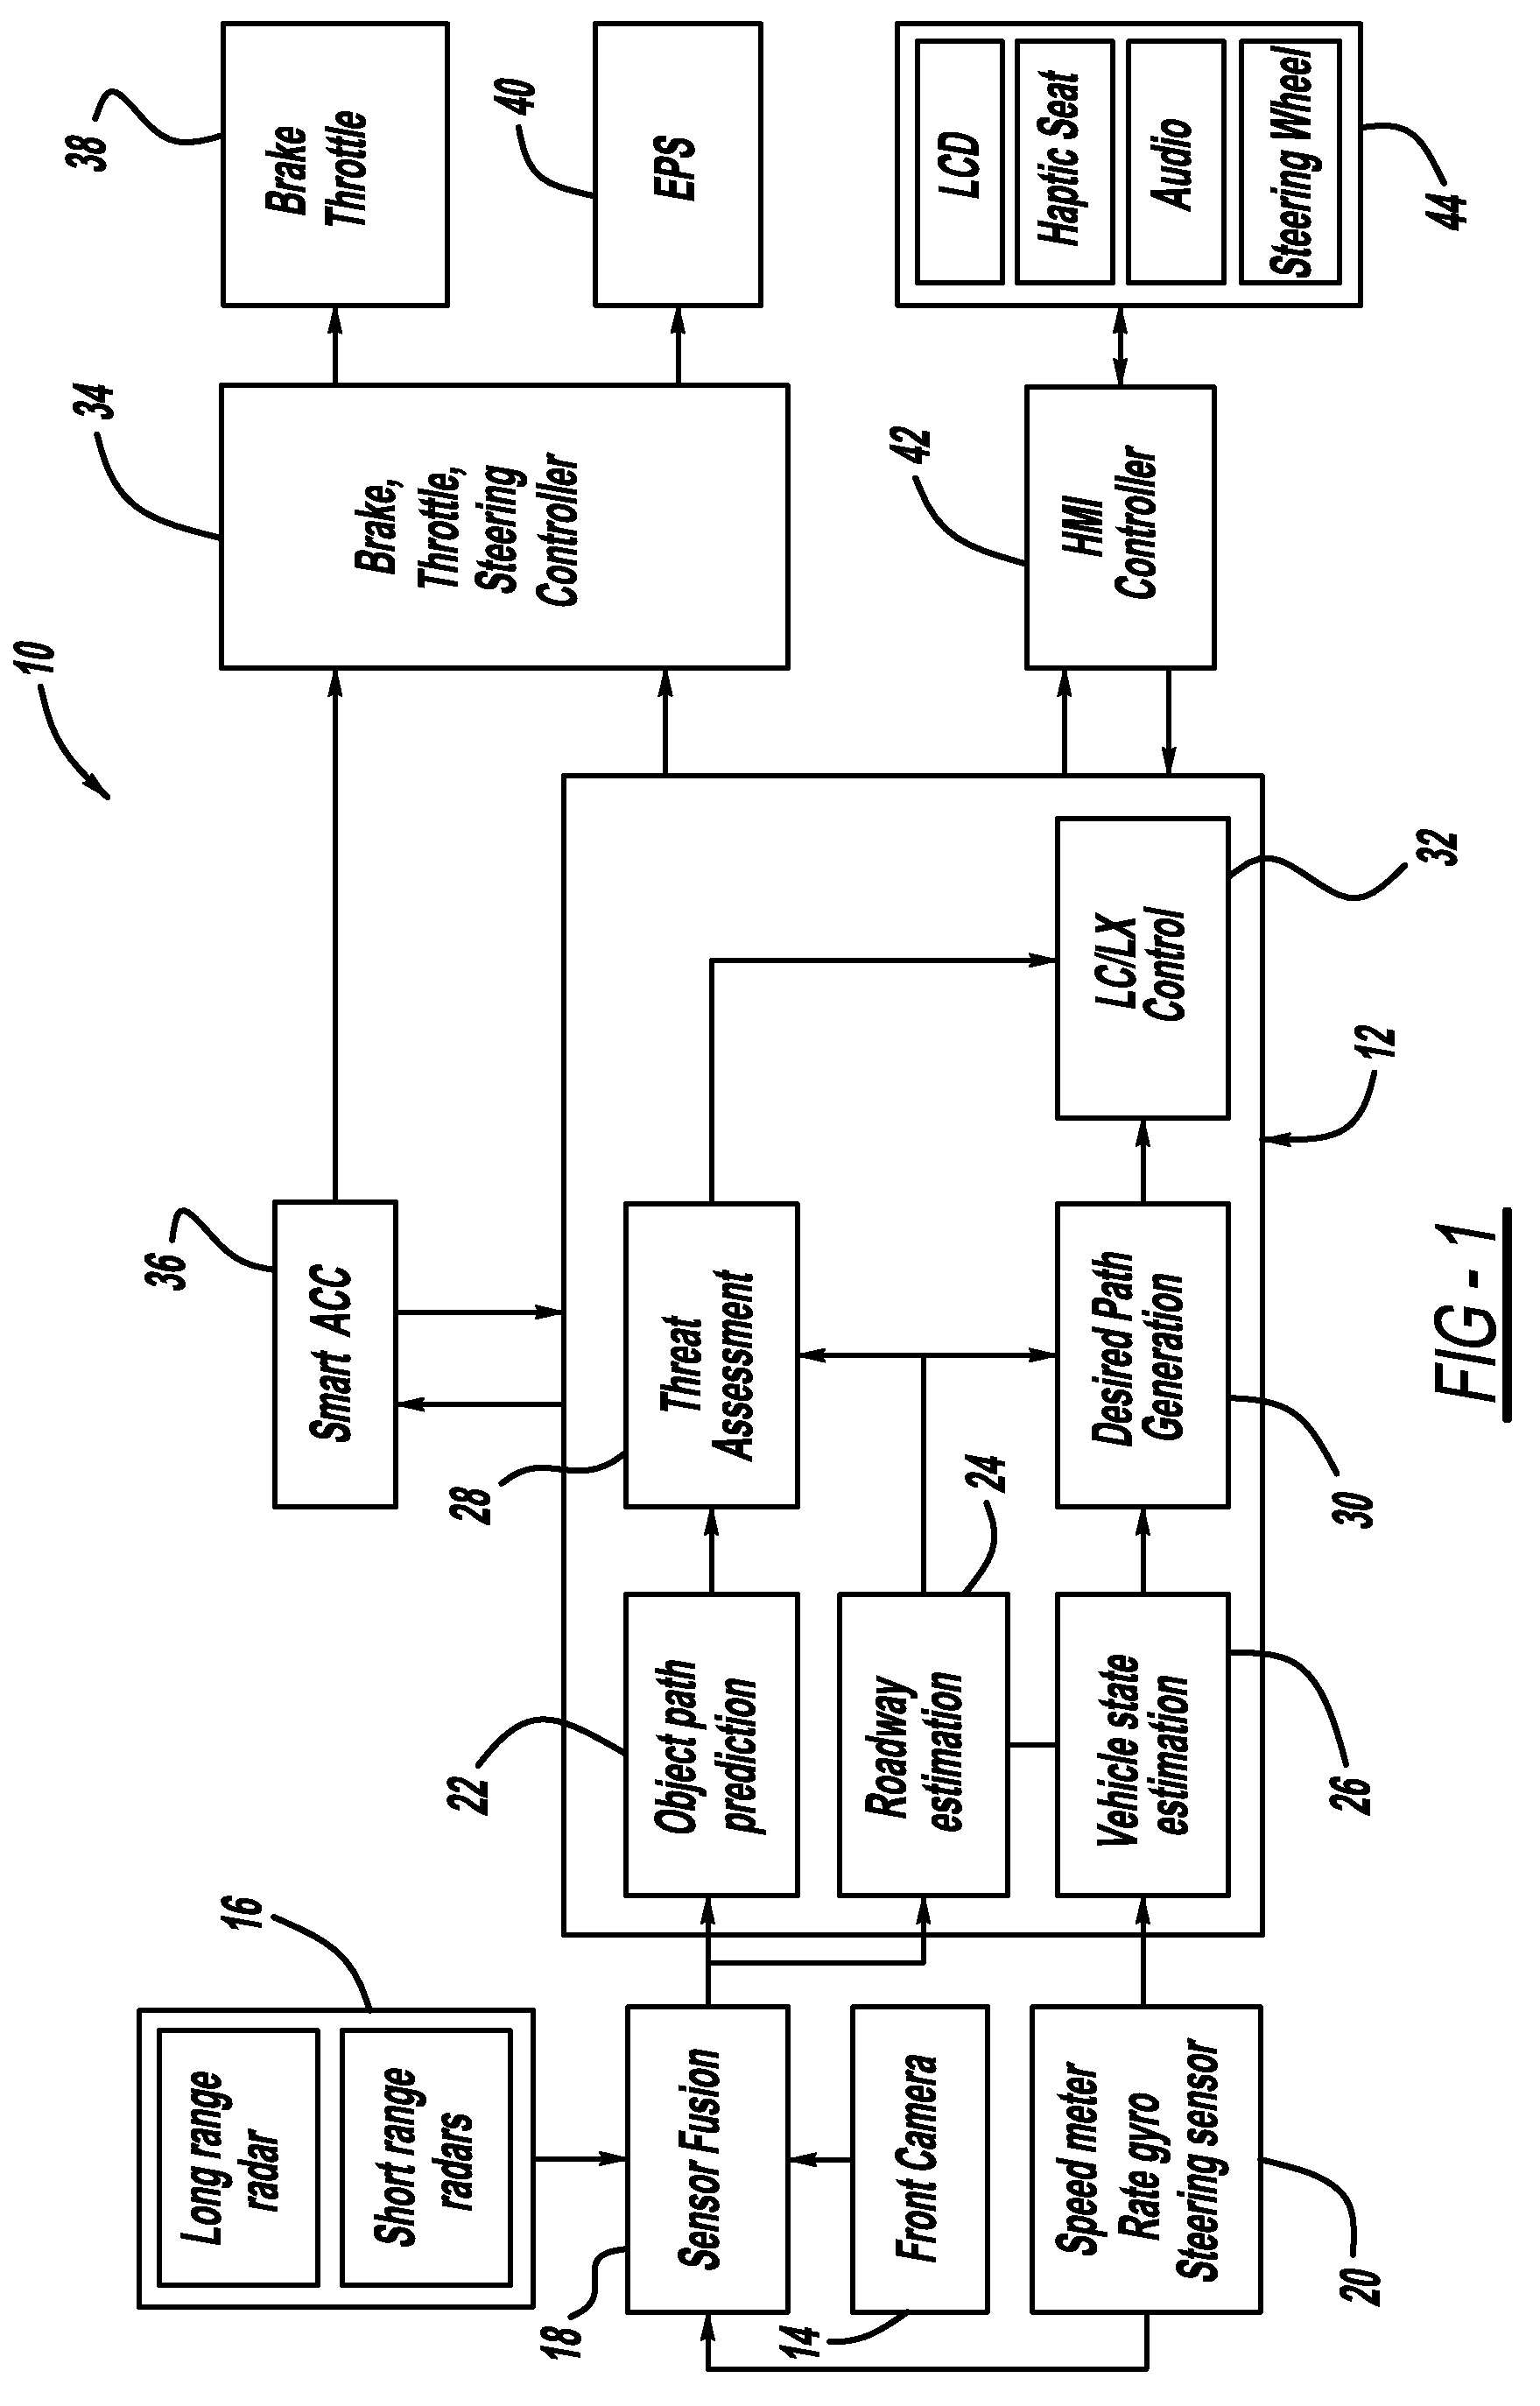 Model based predictive control for automated lane centering/changing control systems